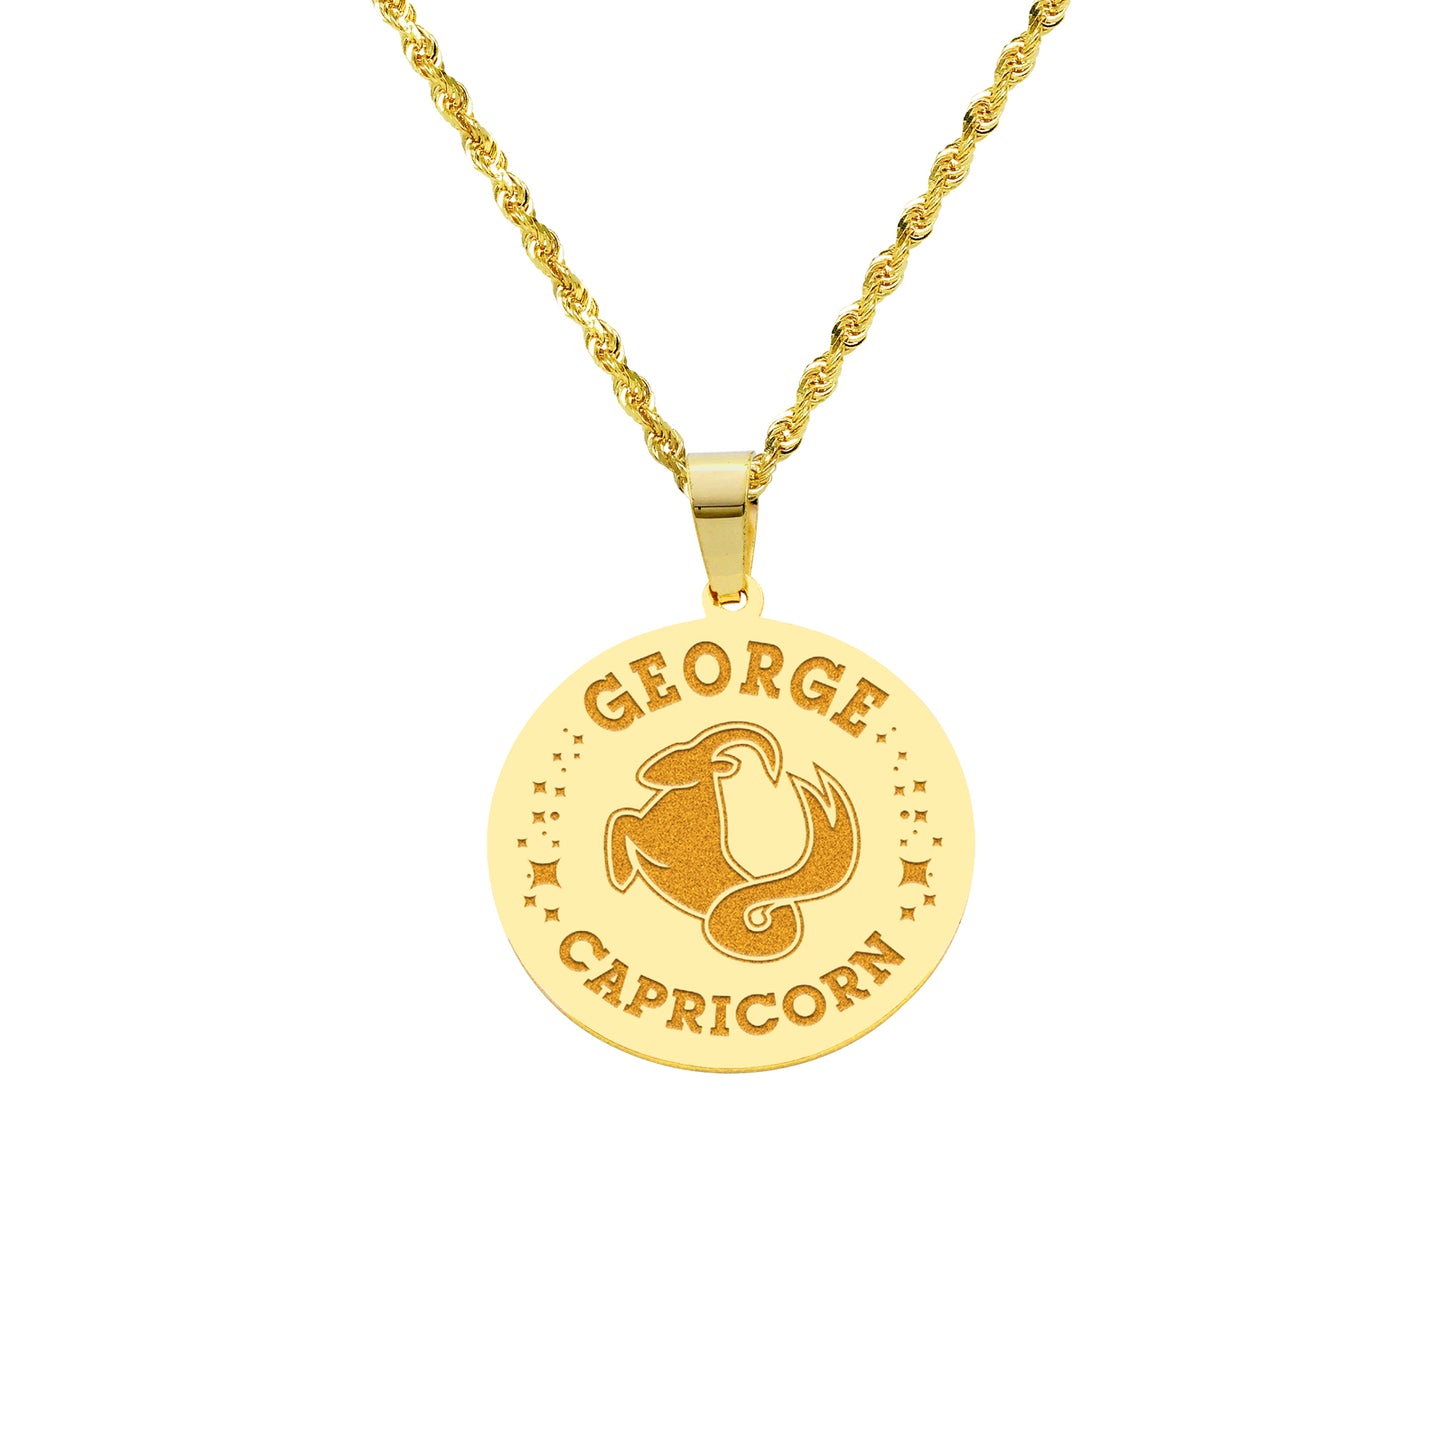 Zodiac Engraved Pendant with Customizable Name in High Polished 14K Gold | 0.75" Capricorn